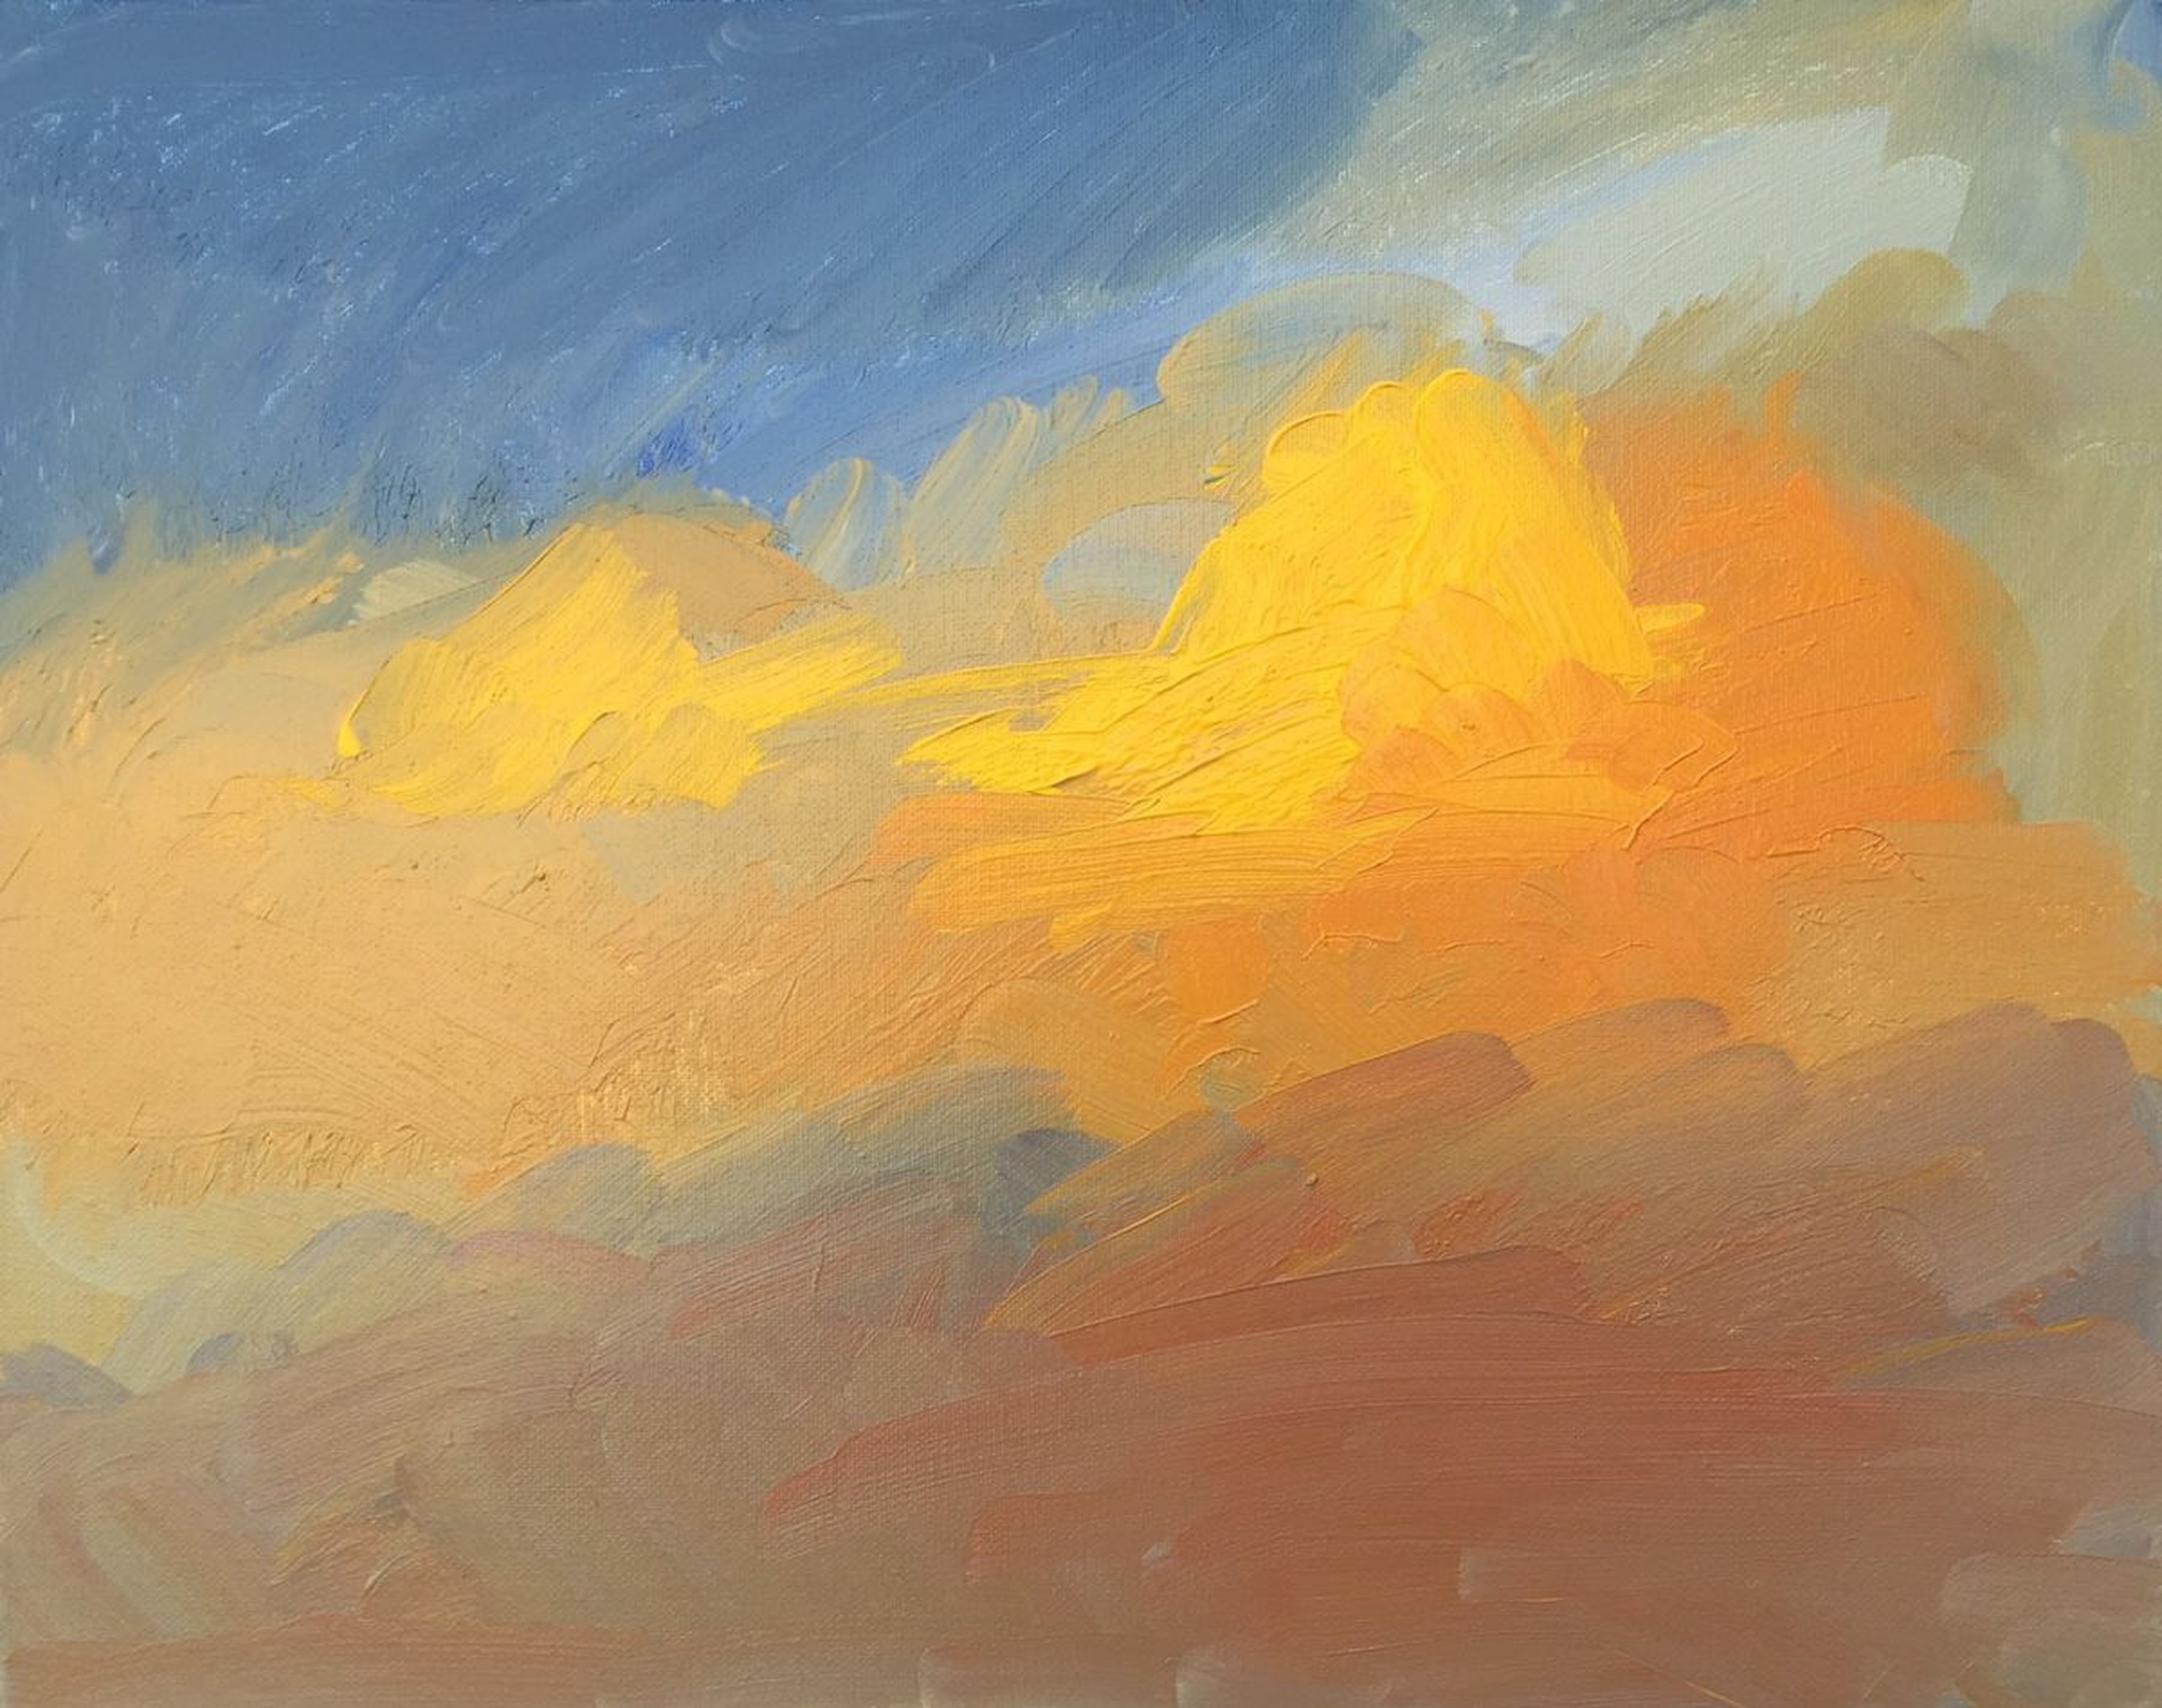 Clouds Sunset 5 Acrylic Painting By Rod Norman Artfinder